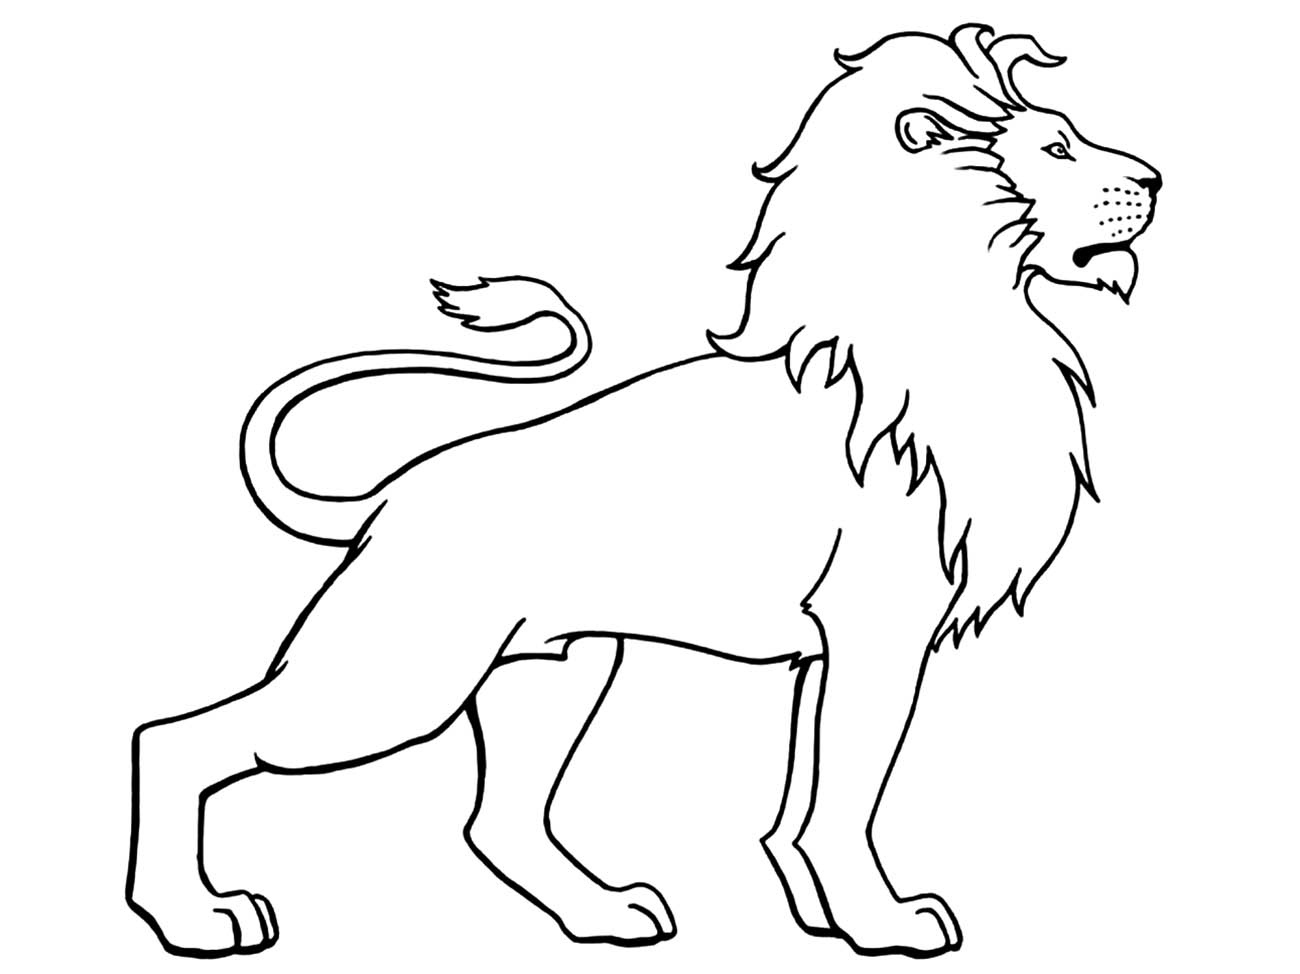 Lion standing - Lion Kids Coloring Pages